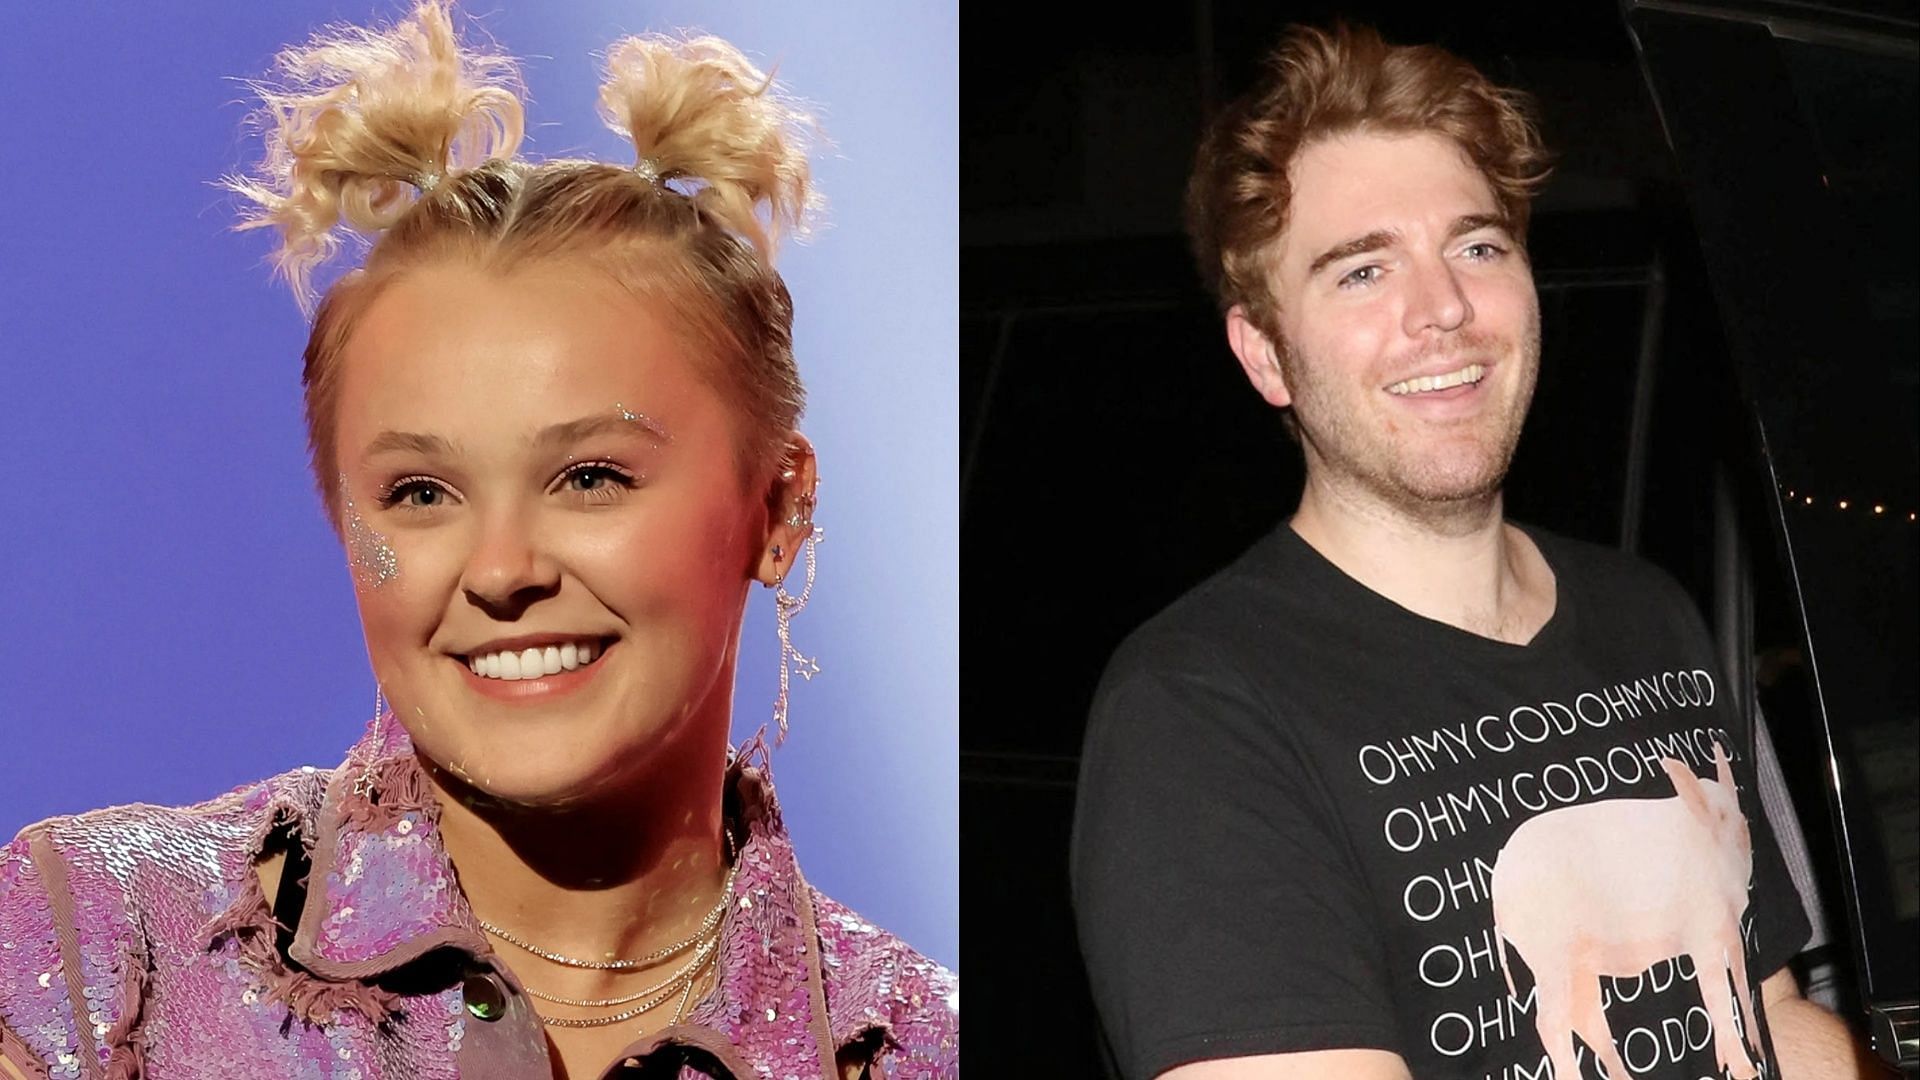 Jojo Siwa has been slammed over YouTube collaboration with Shane Dawson. (Image via Getty Images, GC Images)